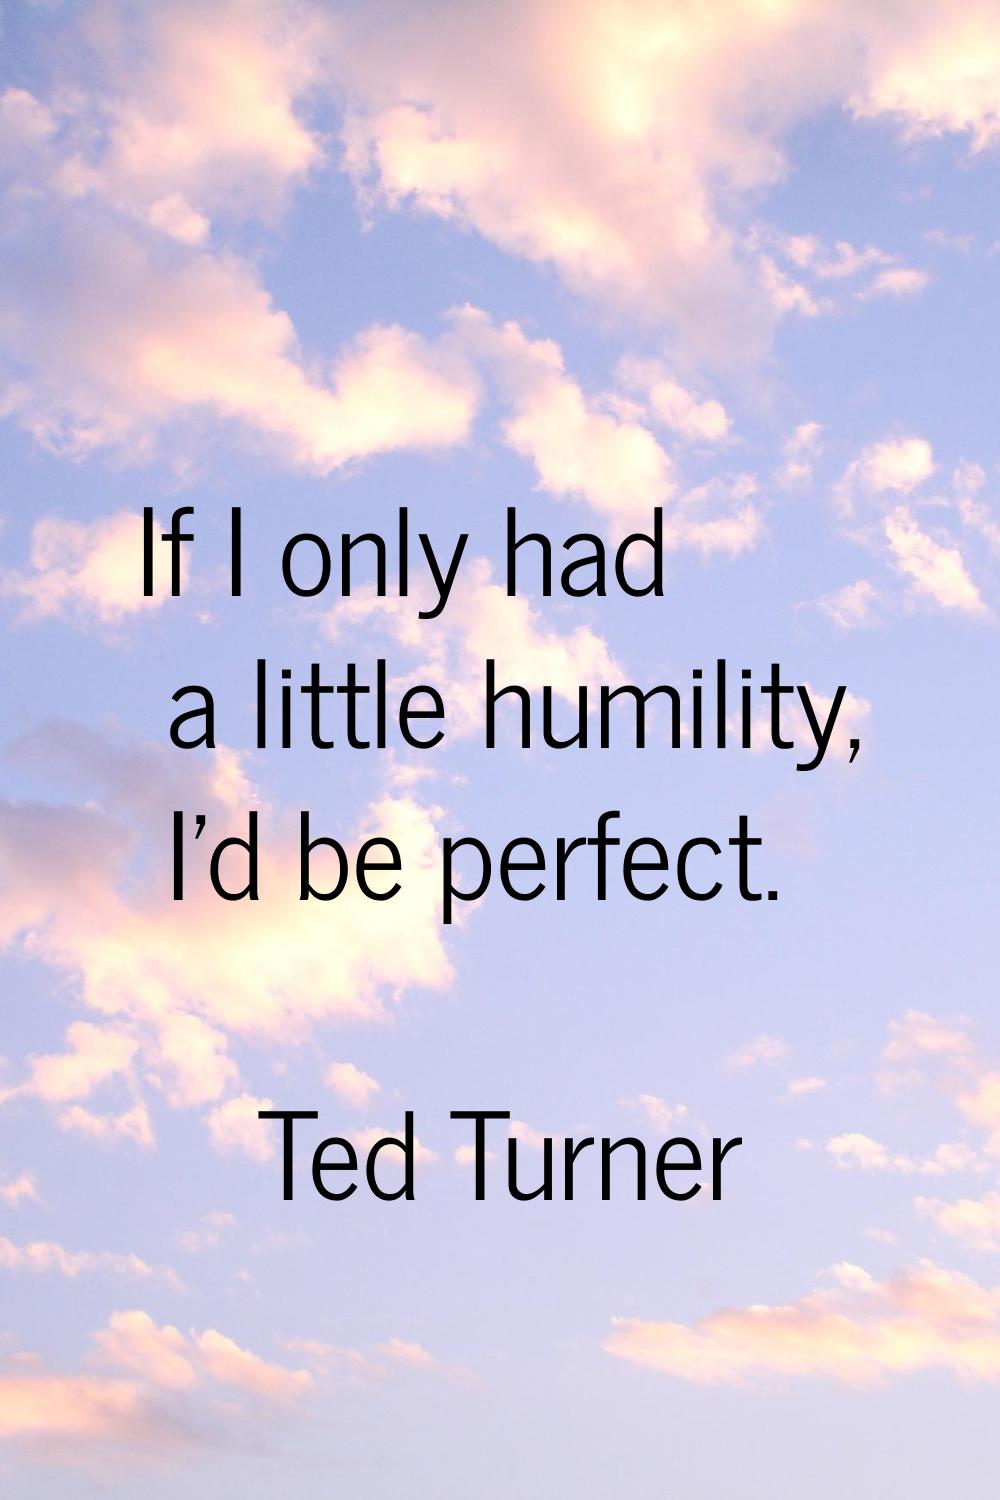 If I only had a little humility, I'd be perfect.